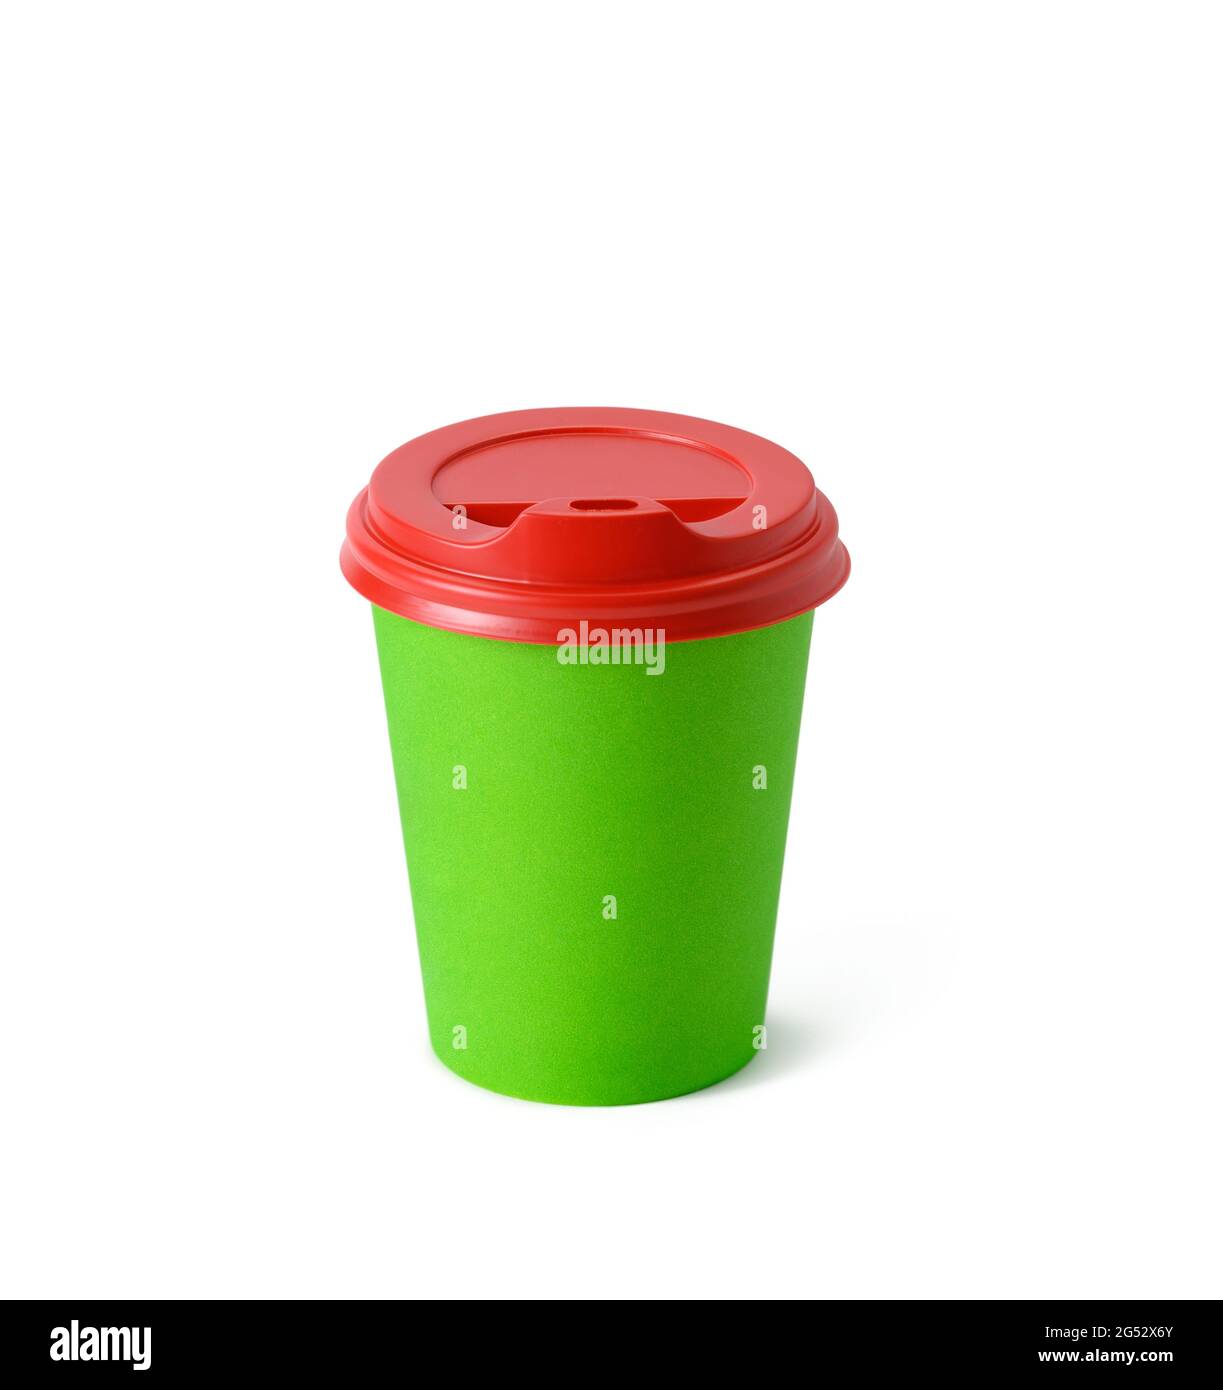 https://c8.alamy.com/comp/2G52X6Y/green-paper-cup-with-red-plastic-lid-for-takeaway-drinks-isolated-on-white-background-container-for-coffee-and-tea-2G52X6Y.jpg